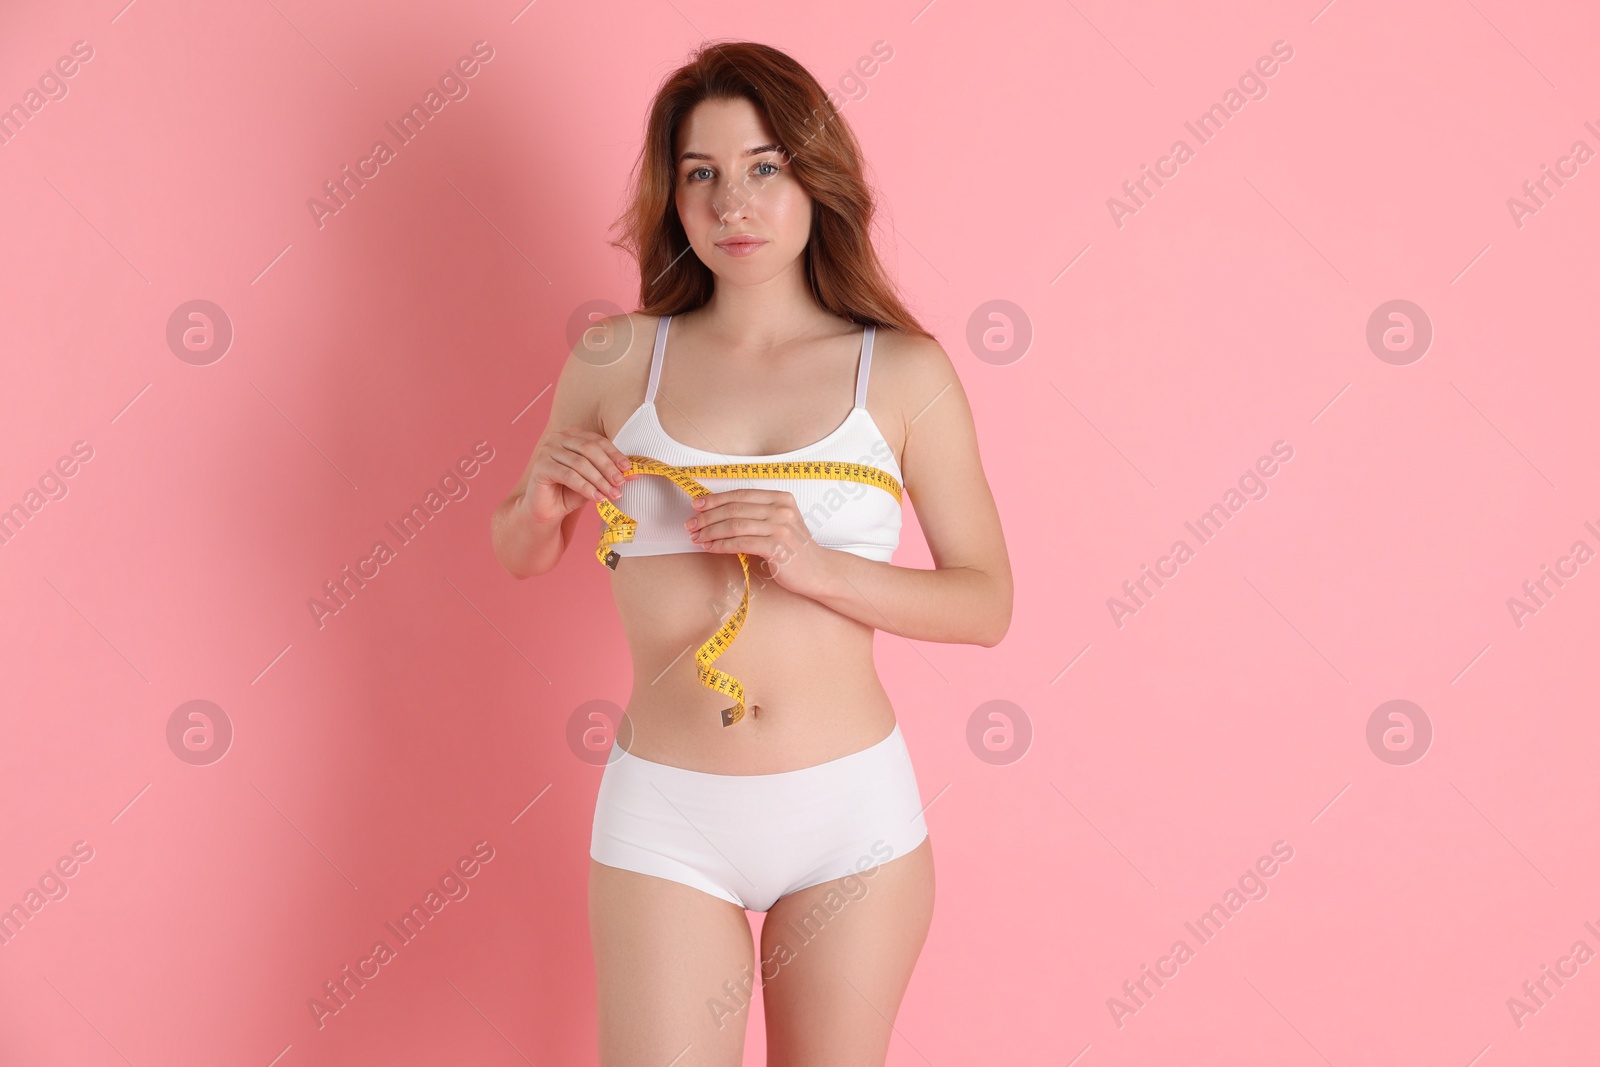 Photo of Woman with measuring tape showing her slim body against pink background